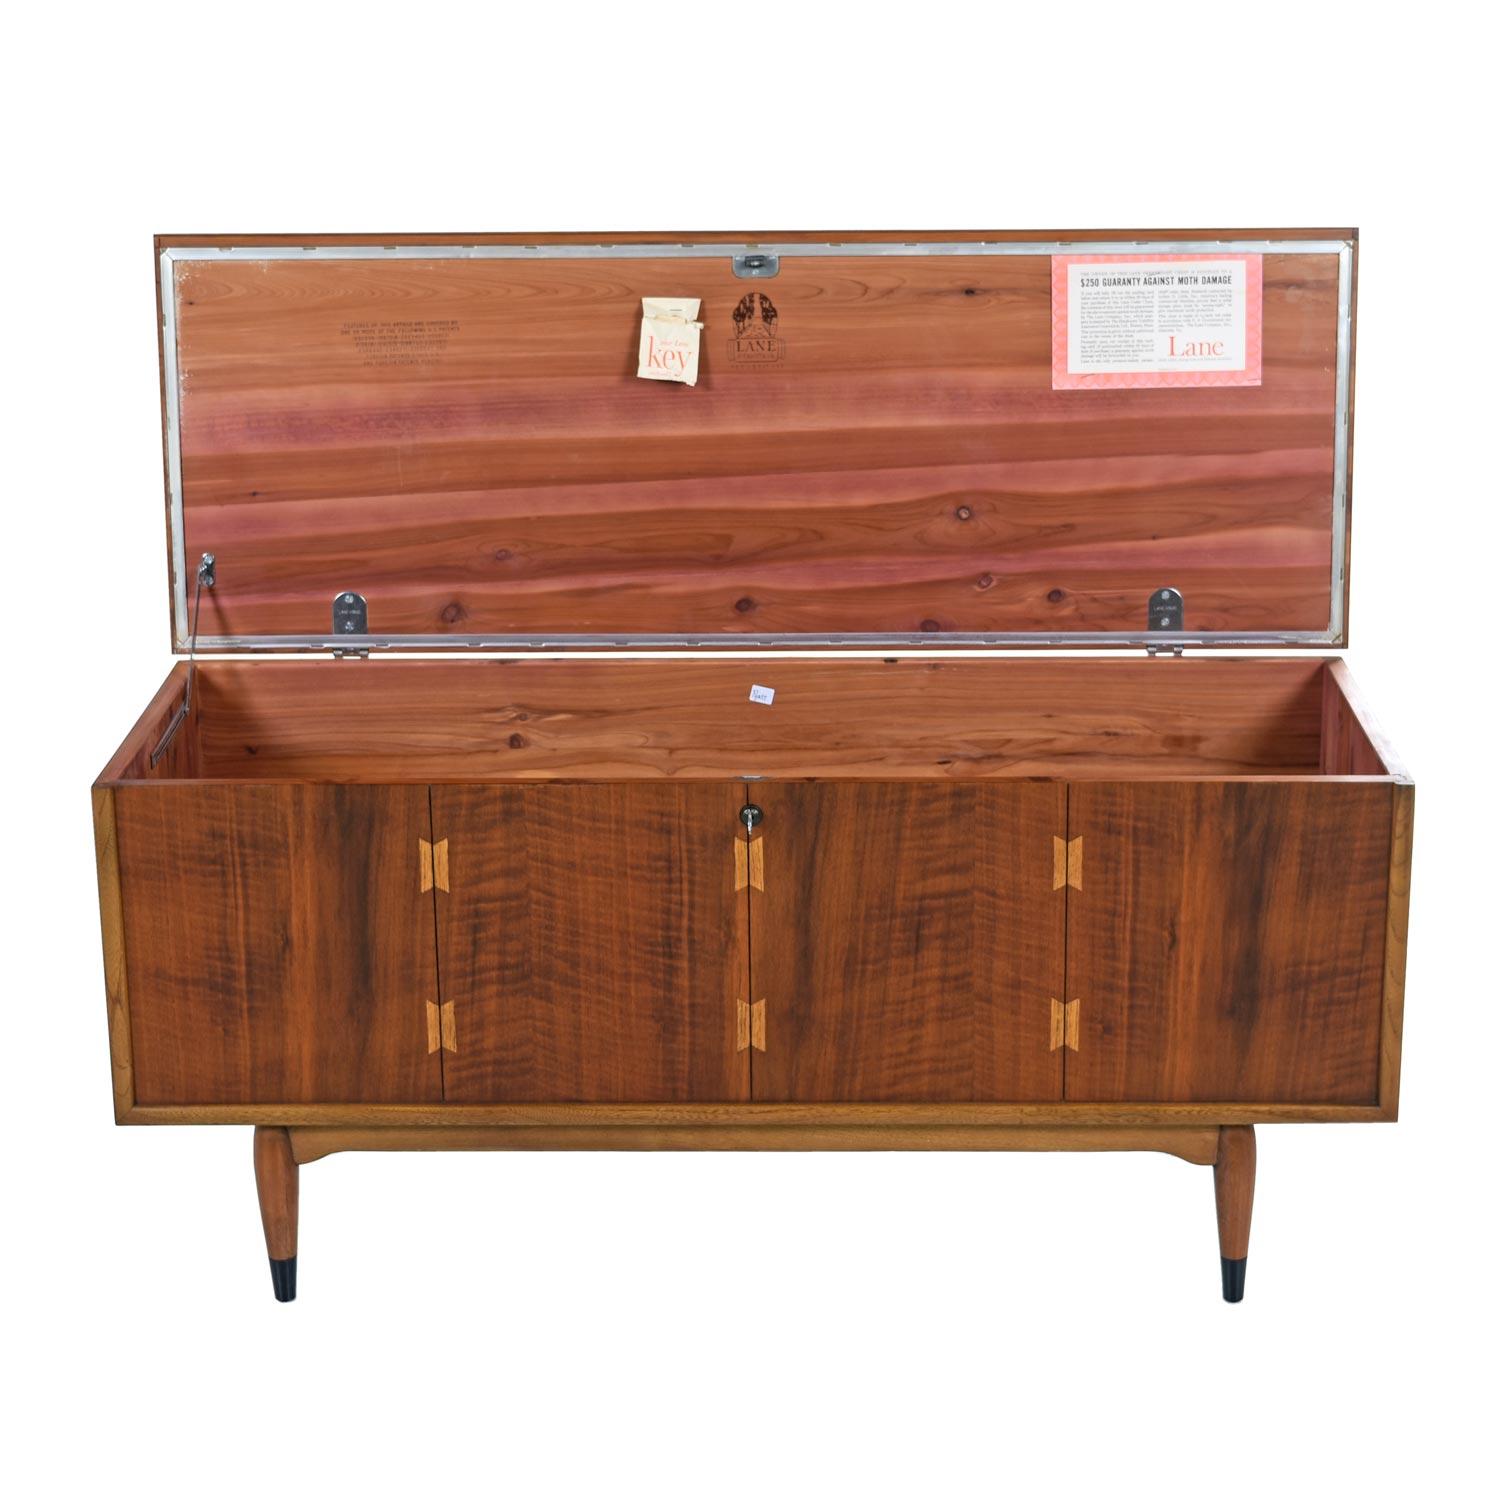 Refinished Mid-Century Modern Lane Acclaim cedar chest. This is a rare model of the Lane cedar chests. The Acclaim chests seldom come to market. Originally intended for storing garments and blankets. This piece can also double as a bench or coffee